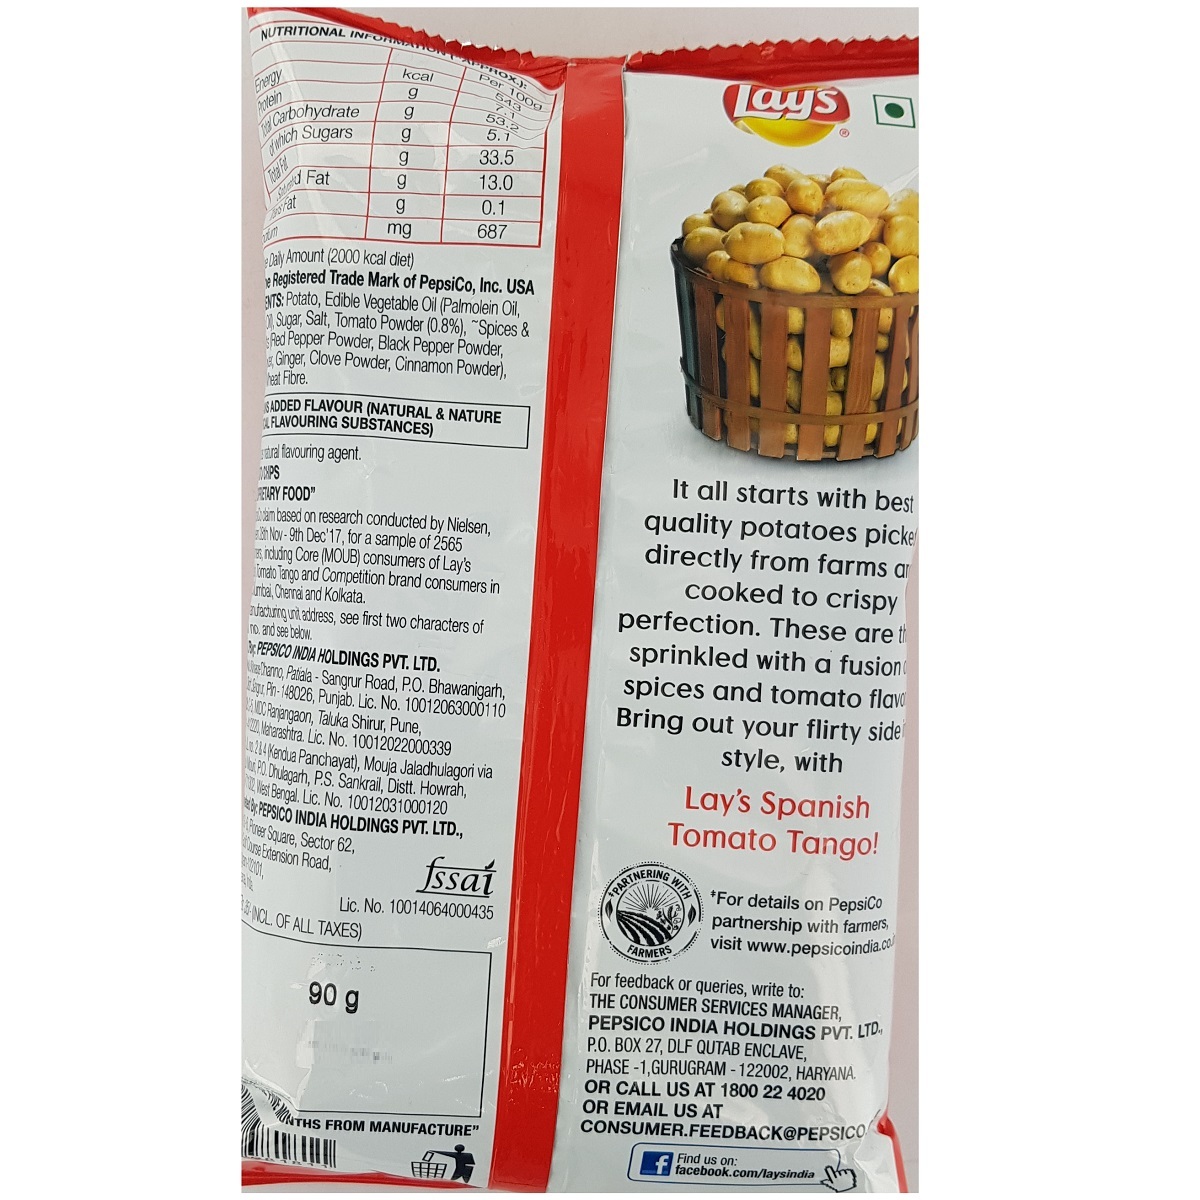 Lays Spanish Tomto Tangle 95g